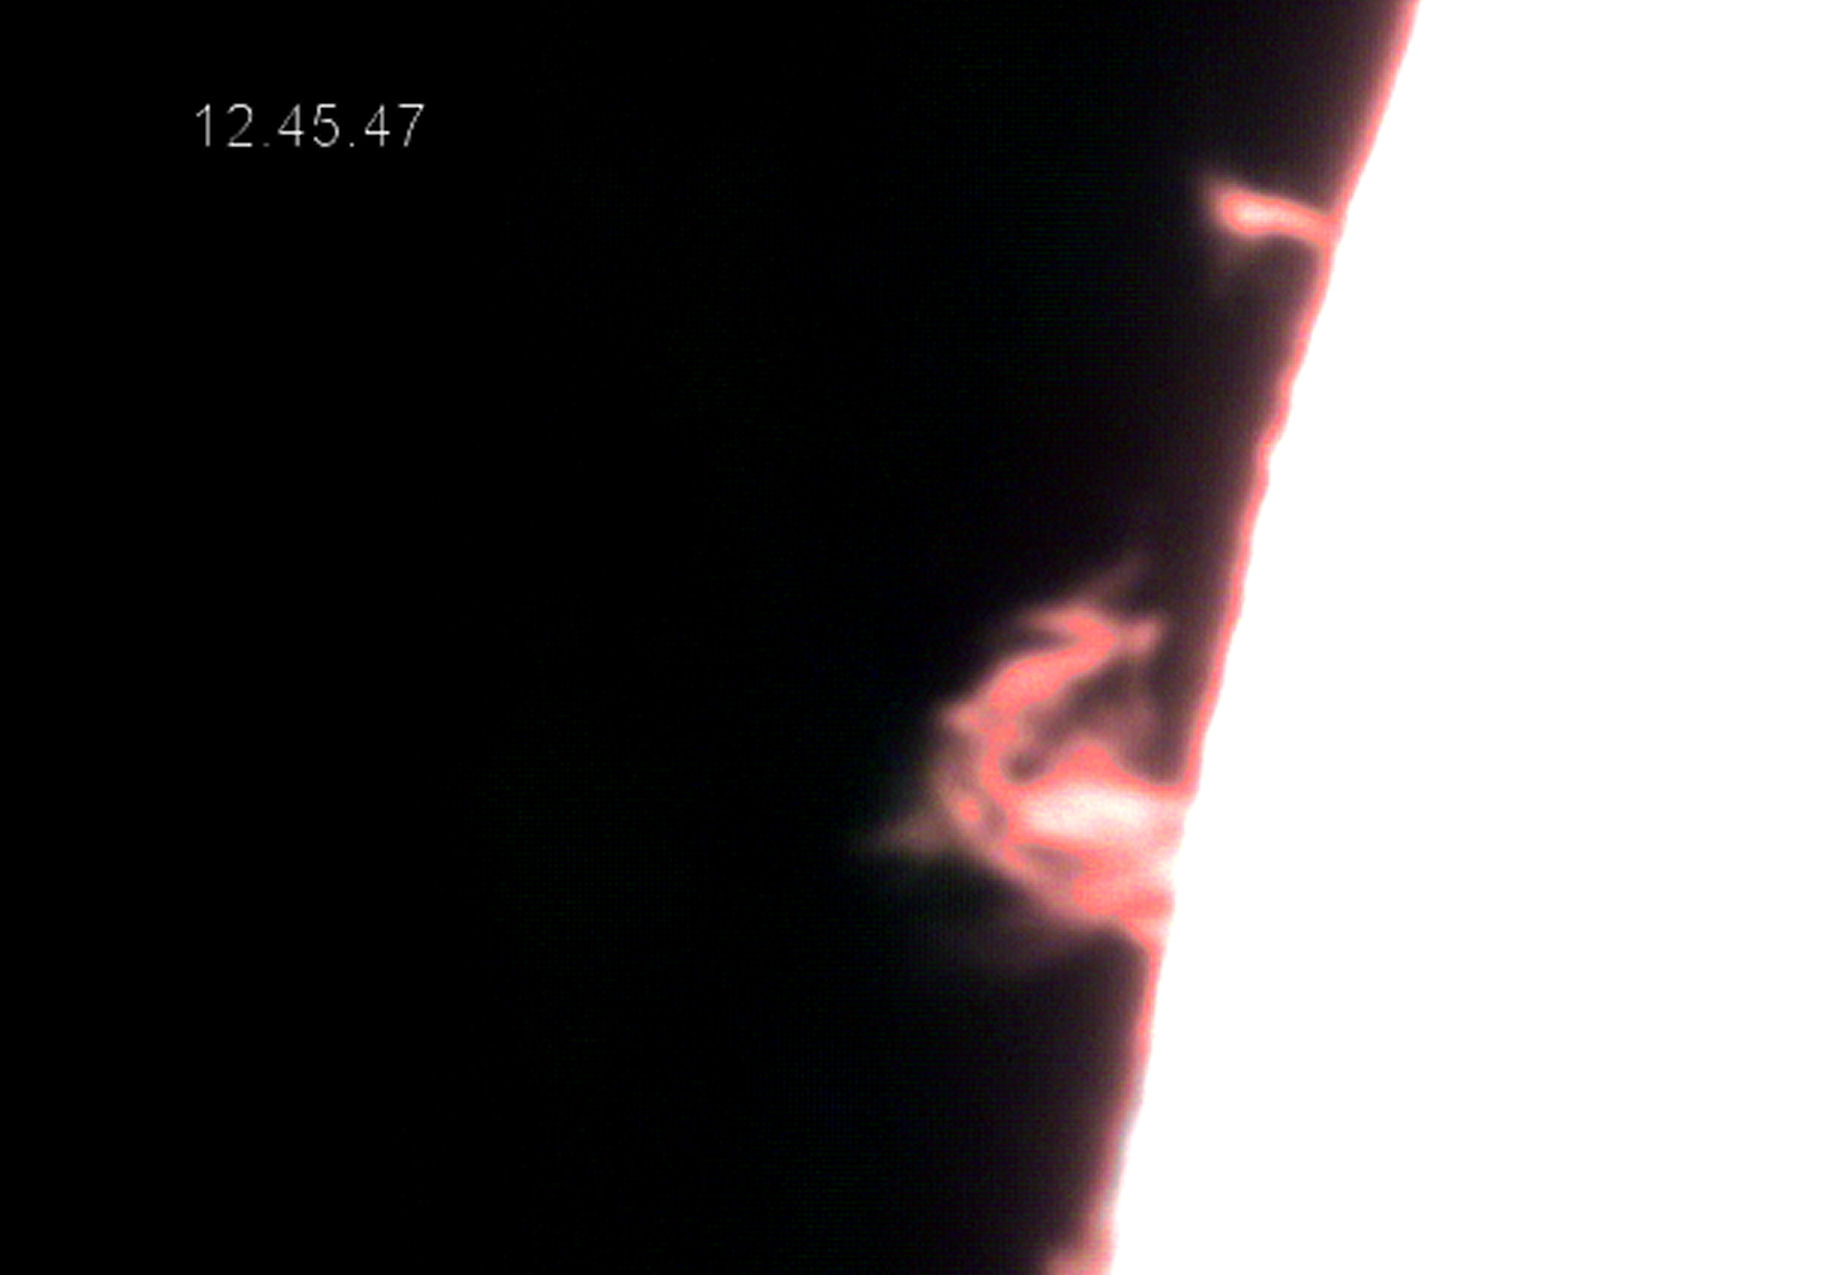 Solar Prominence By T Hayes 7th September 2015. Lunt 35mm H-A telescope with 2xBarlow, Celestron nexstar 5 camera.  15 second movie converted in Virtual Dub and then processed in aviStack